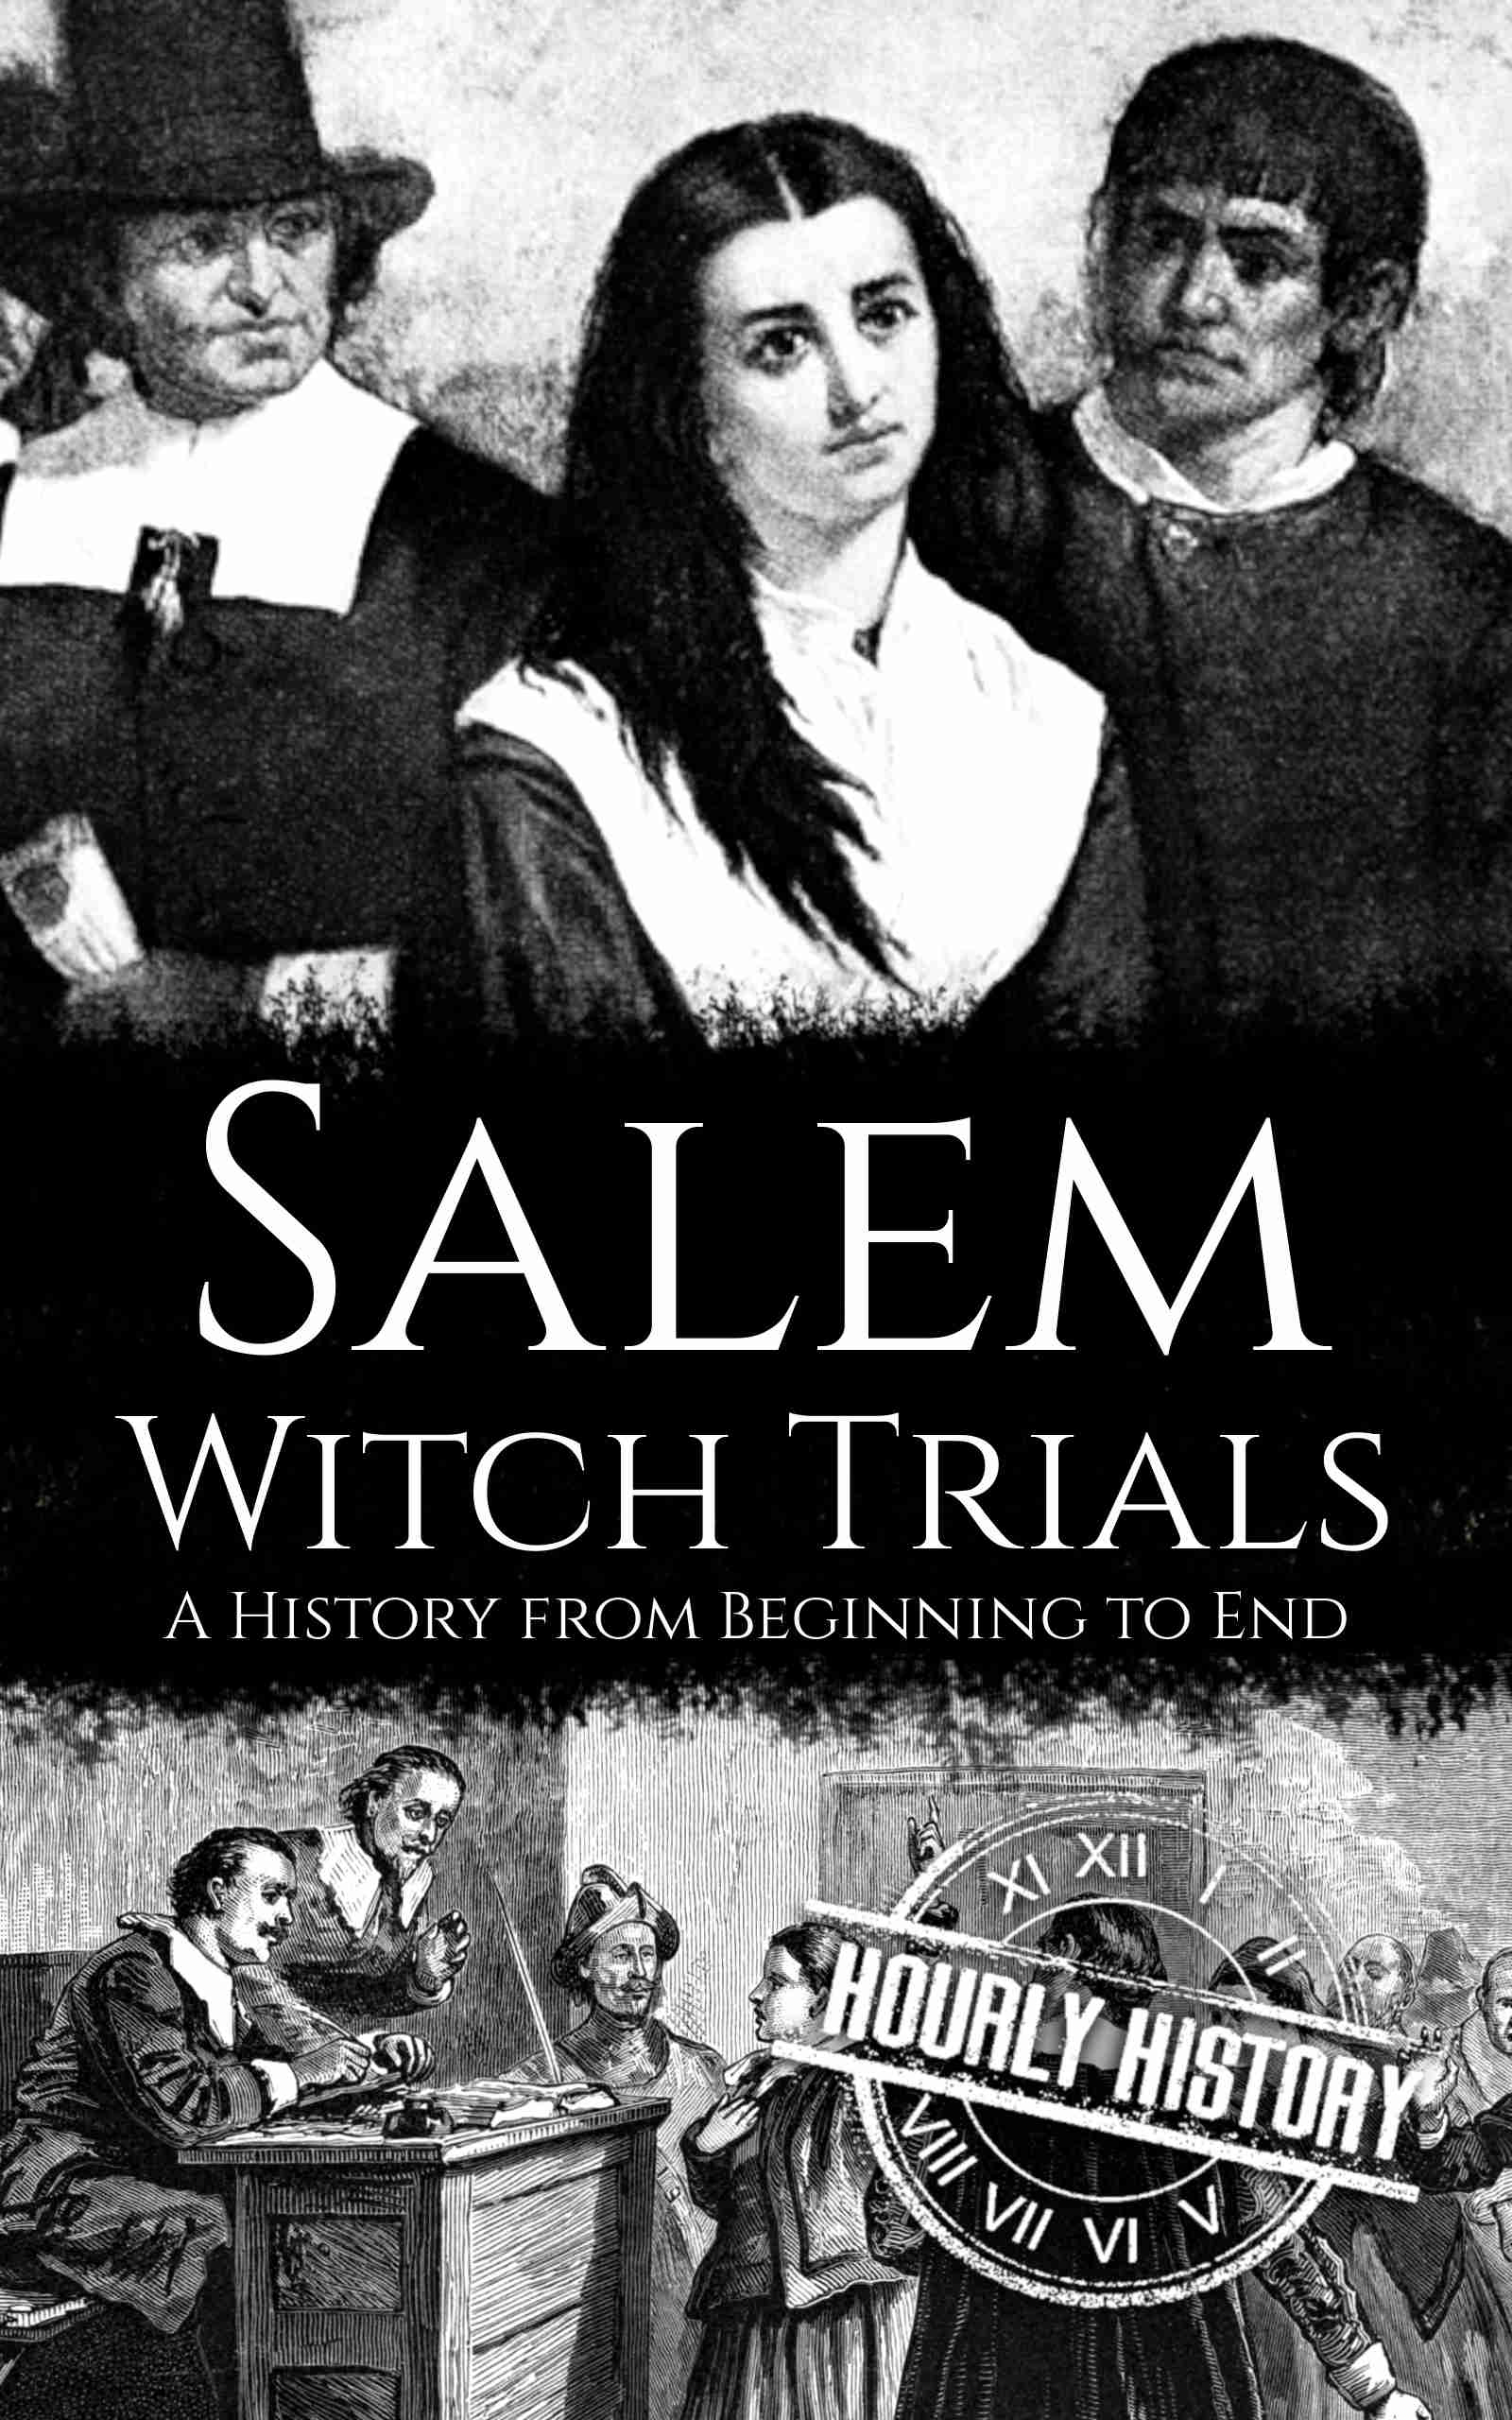 research topics on salem witch trials